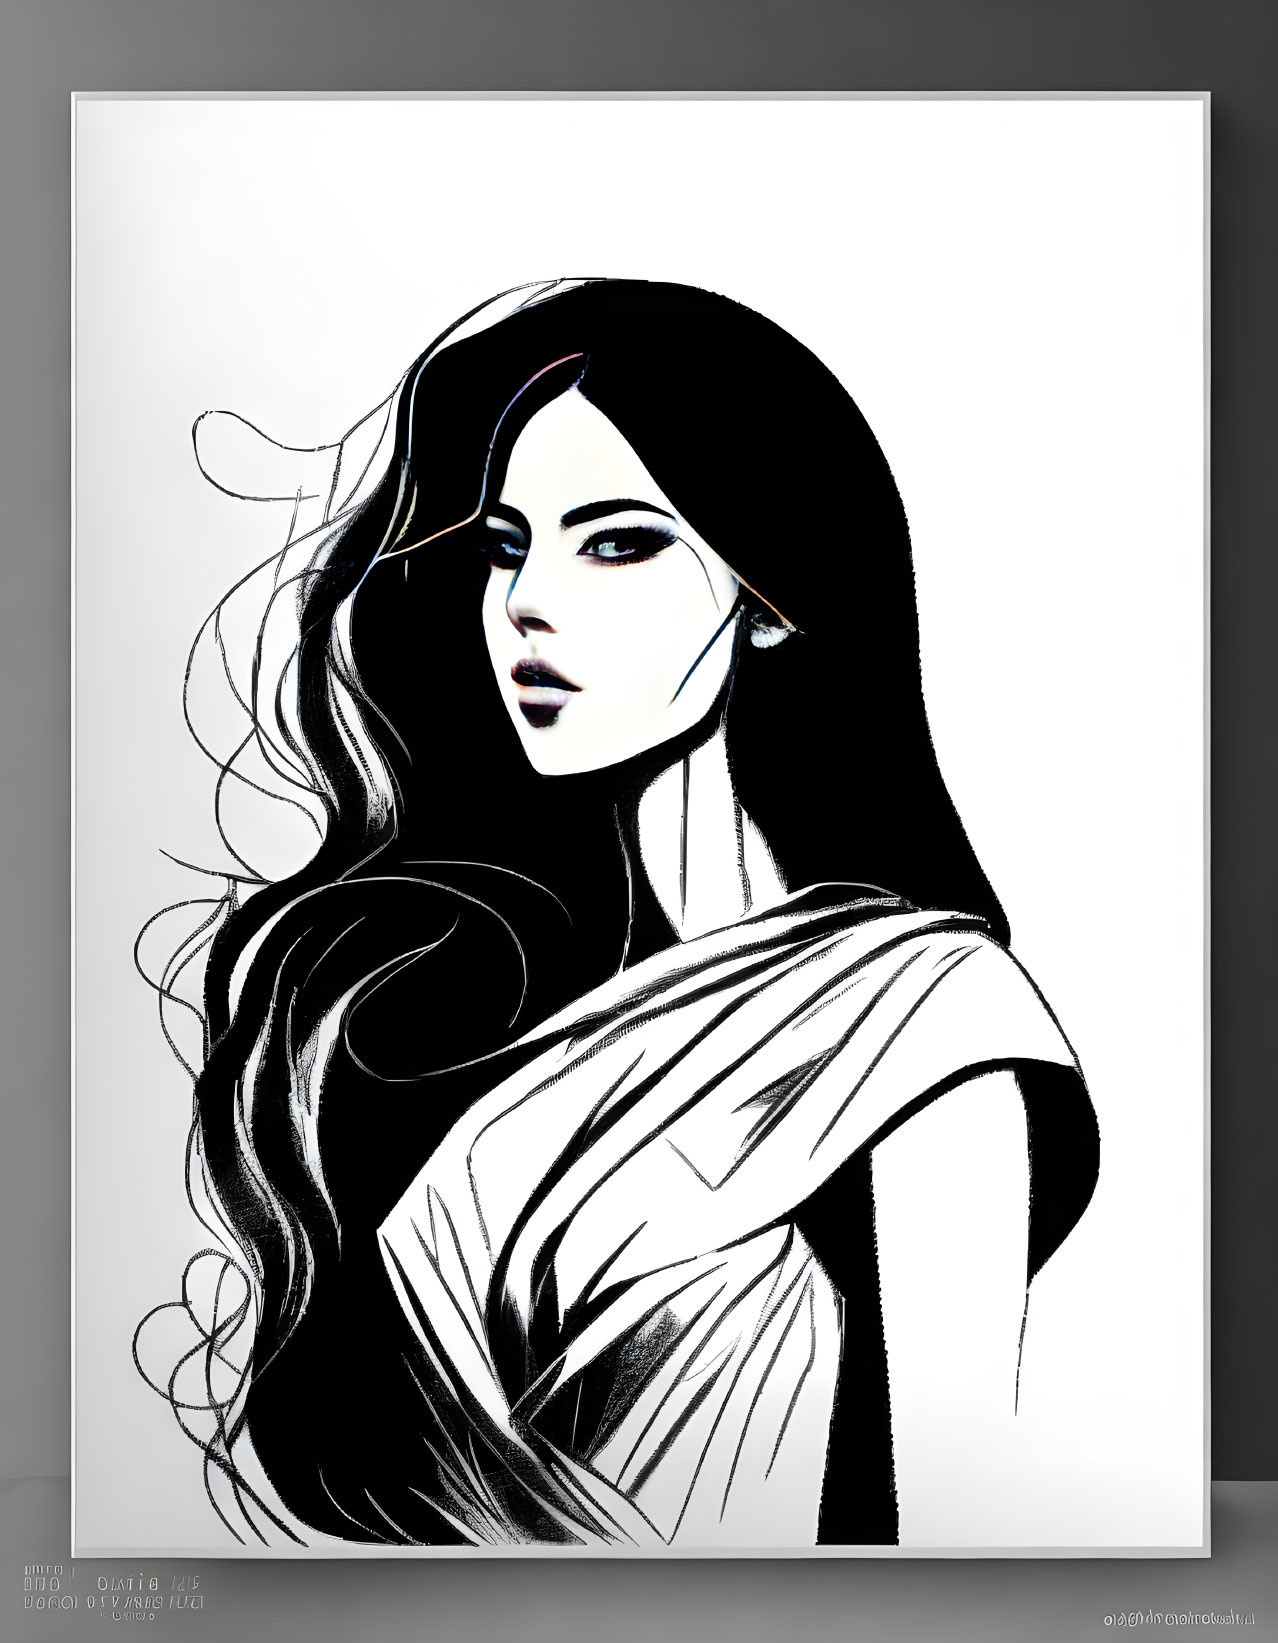 Monochromatic digital artwork: Woman with flowing hair and penetrating gaze, high-contrast shading, abstract